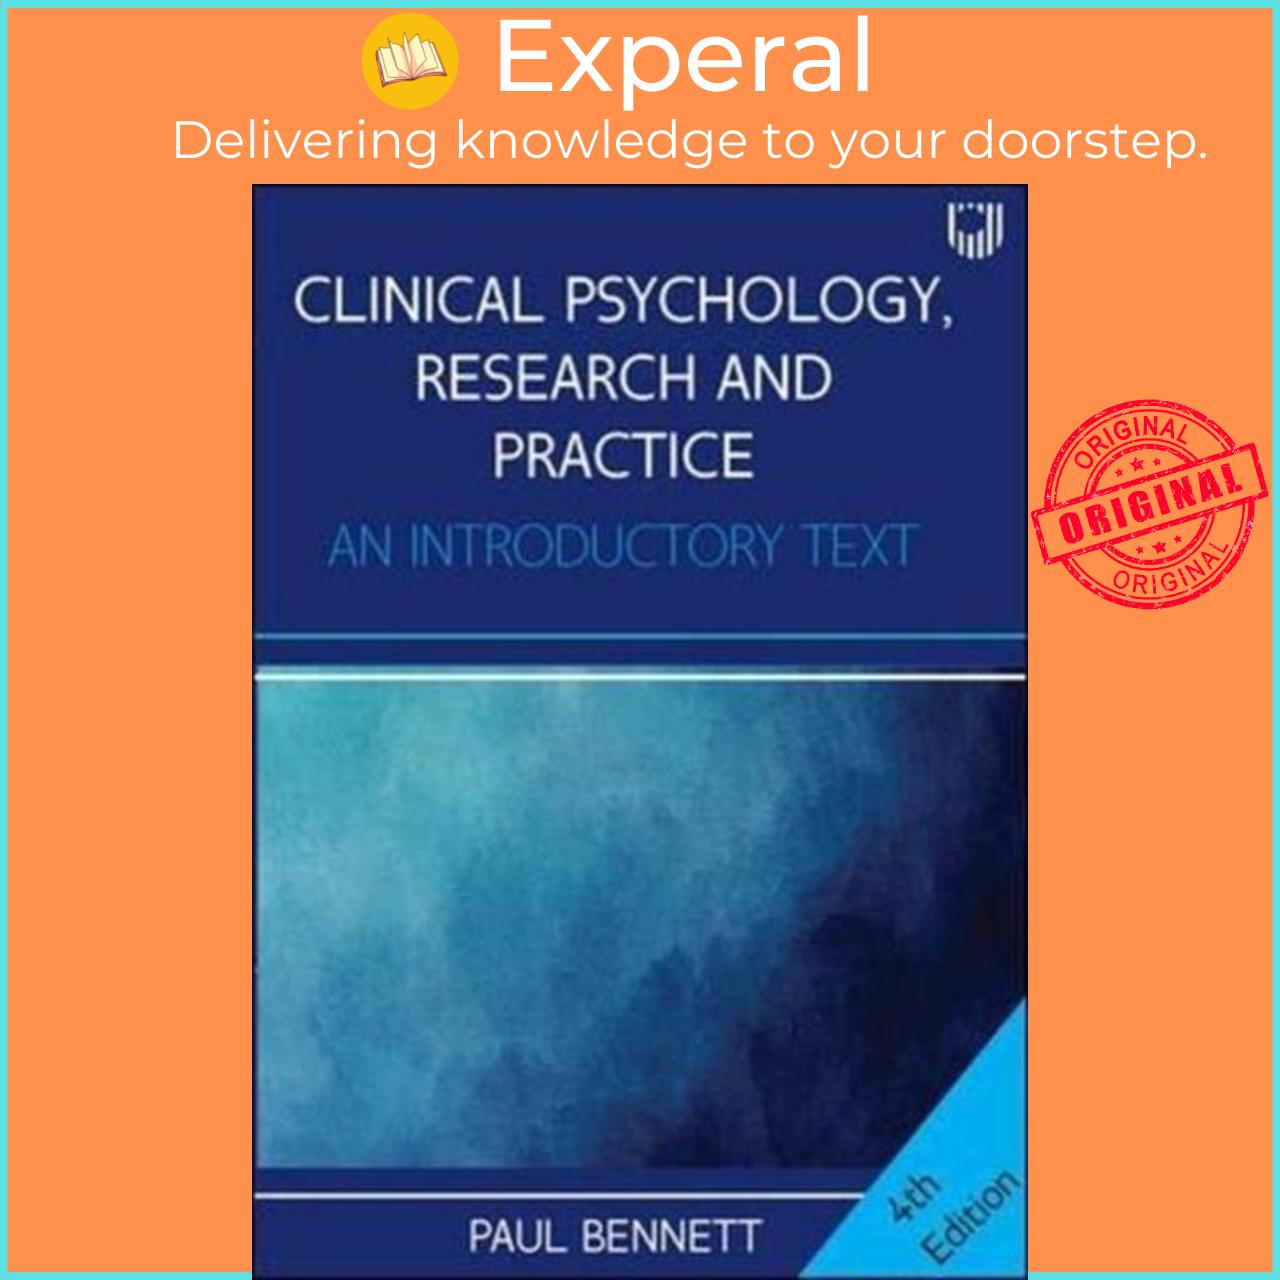 Sách - Clinical Psychology, Research and Practice: An Introductory Textbook, 4e by Paul Bennett (UK edition, paperback)